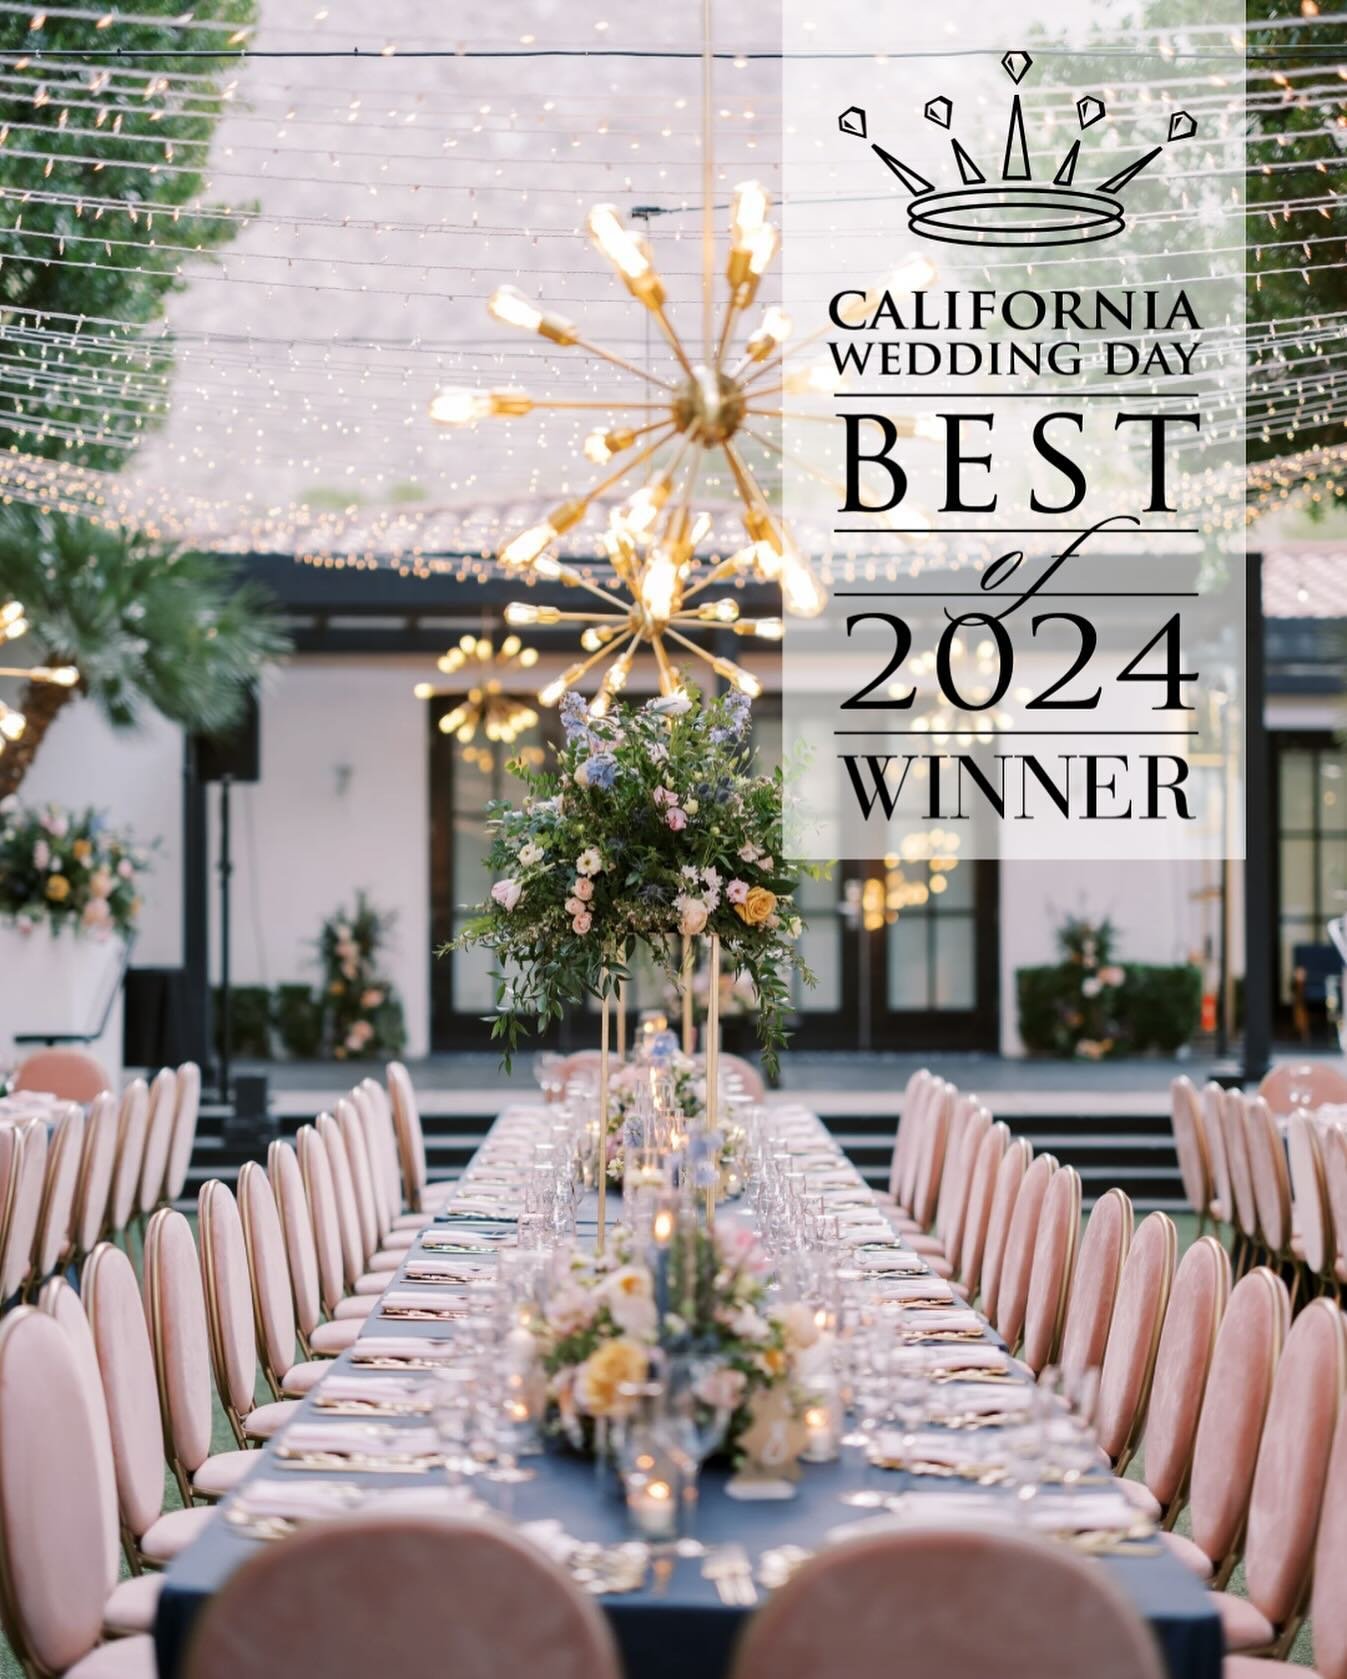 What a night! The California Wedding Day Best of Awards is the wedding industry &ldquo;Oscar&rsquo;s&rdquo; - and THE event of the year for California wedding pros! I was honored (again) to be asked by @californiaweddingday to lead the design team on